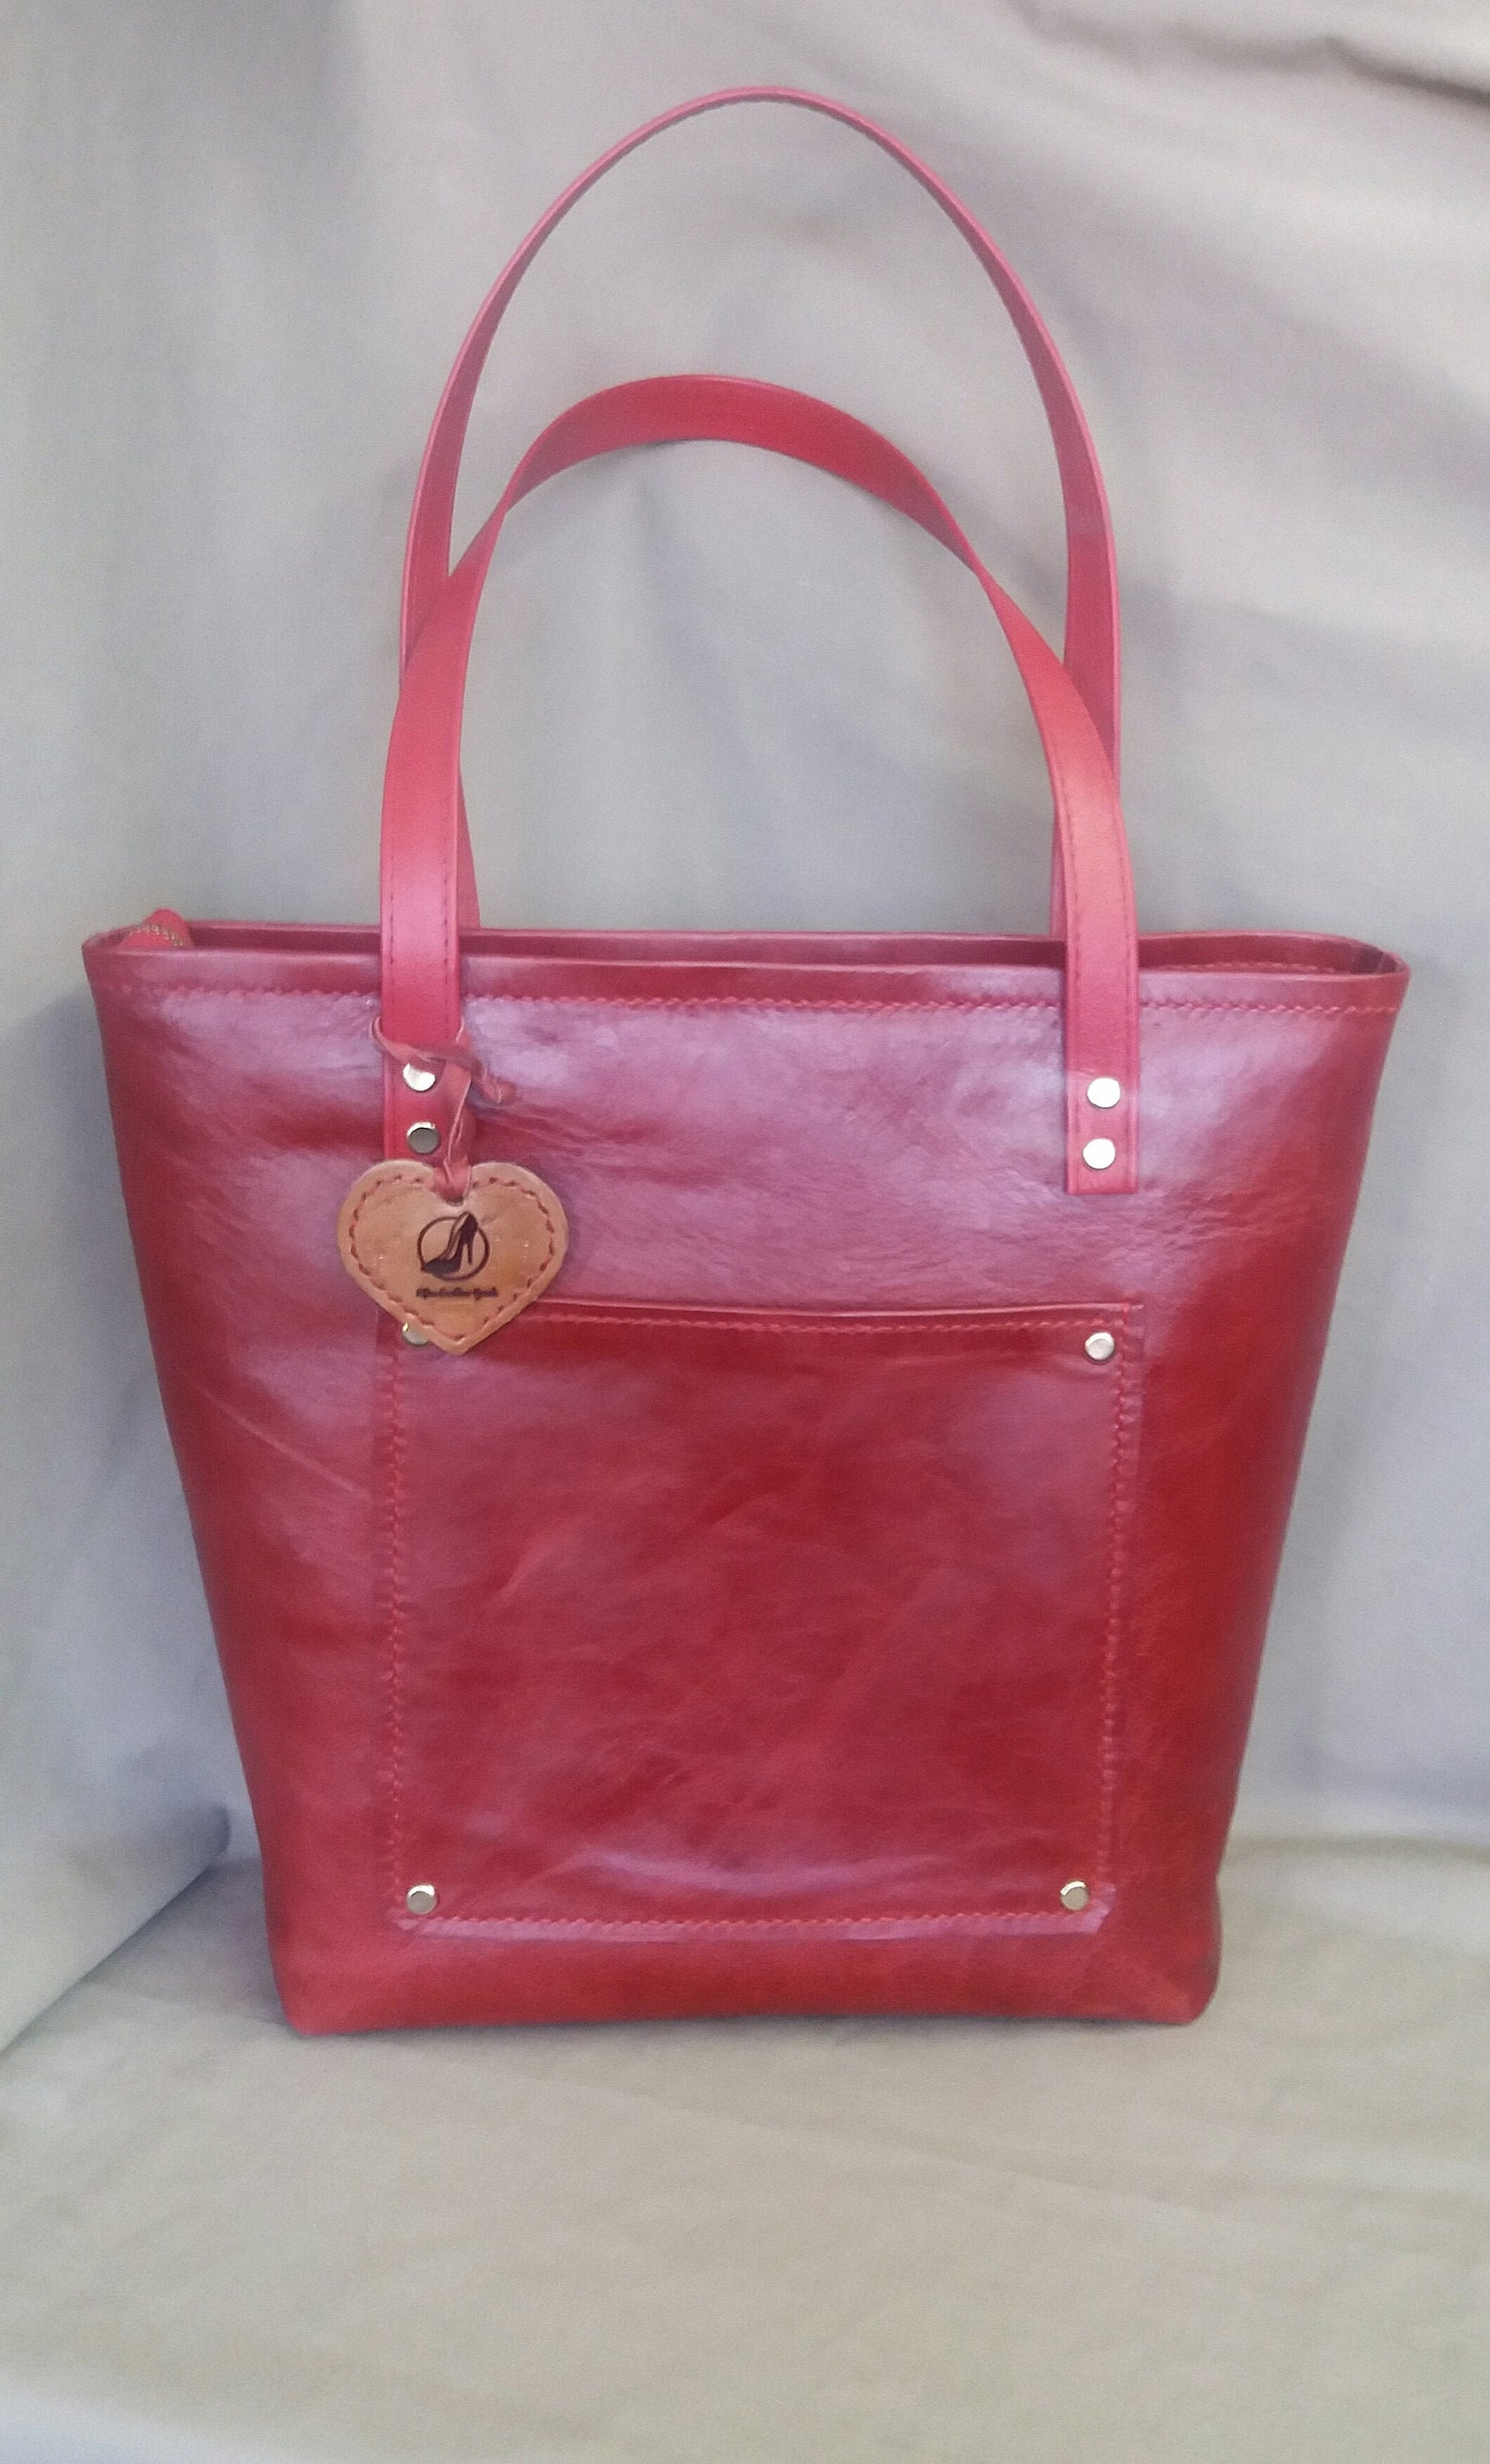 Red Leather Shopper Medium Leather Tote Leather Tote Bag for - Etsy